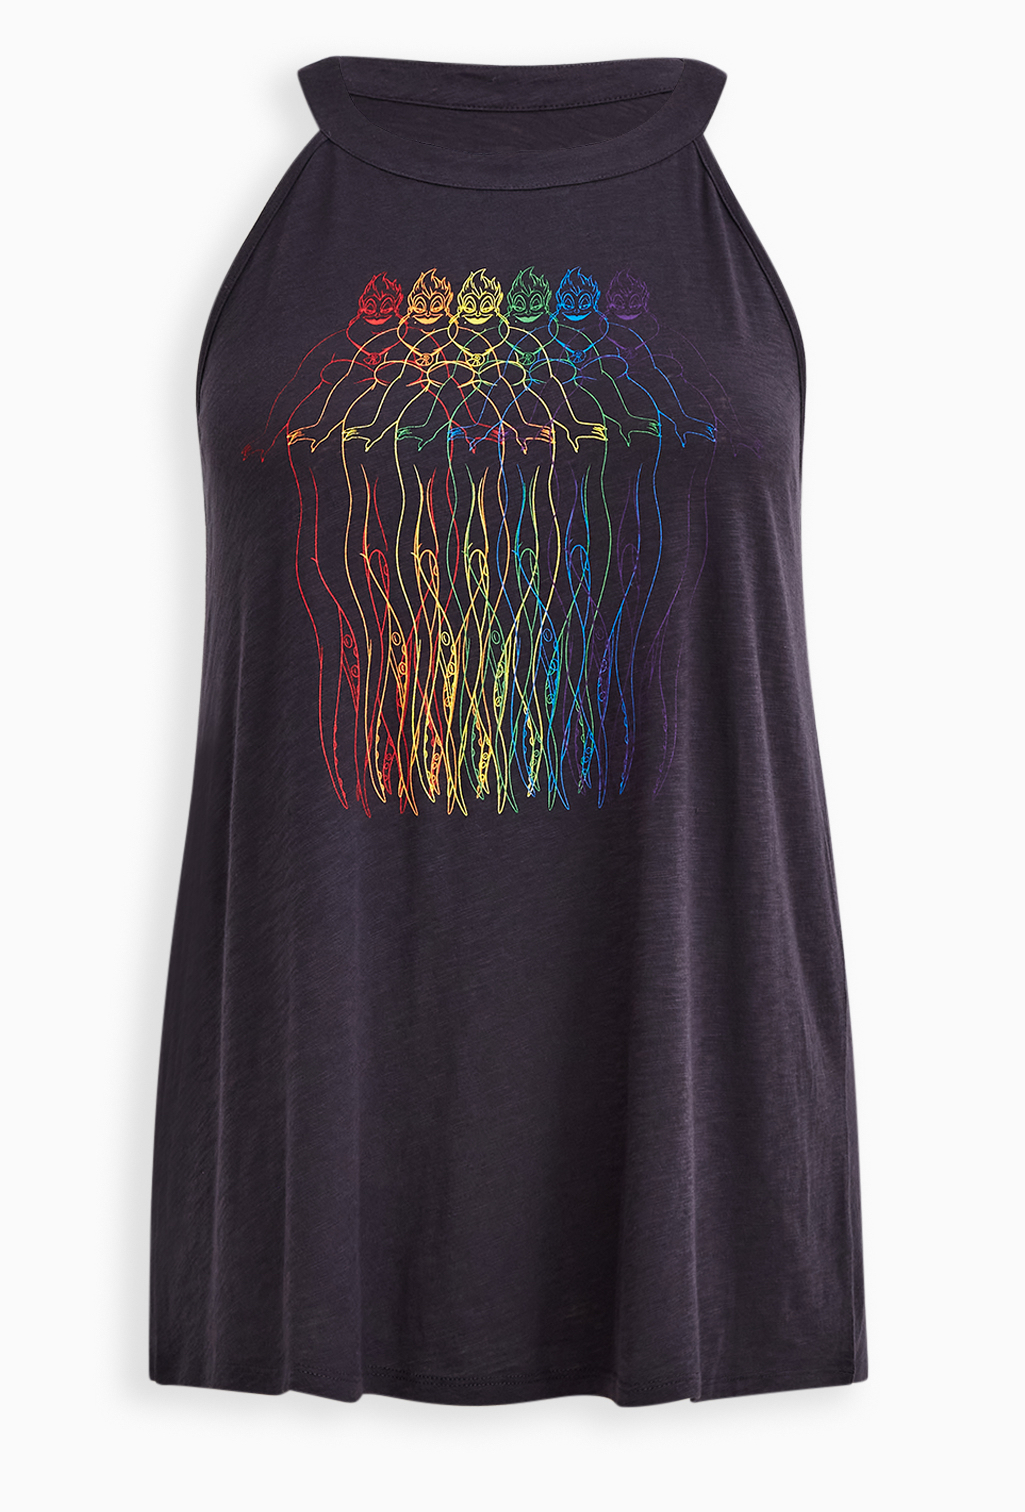 A long high-neck tank top with a print of Ursula in outline format in rainbow colors